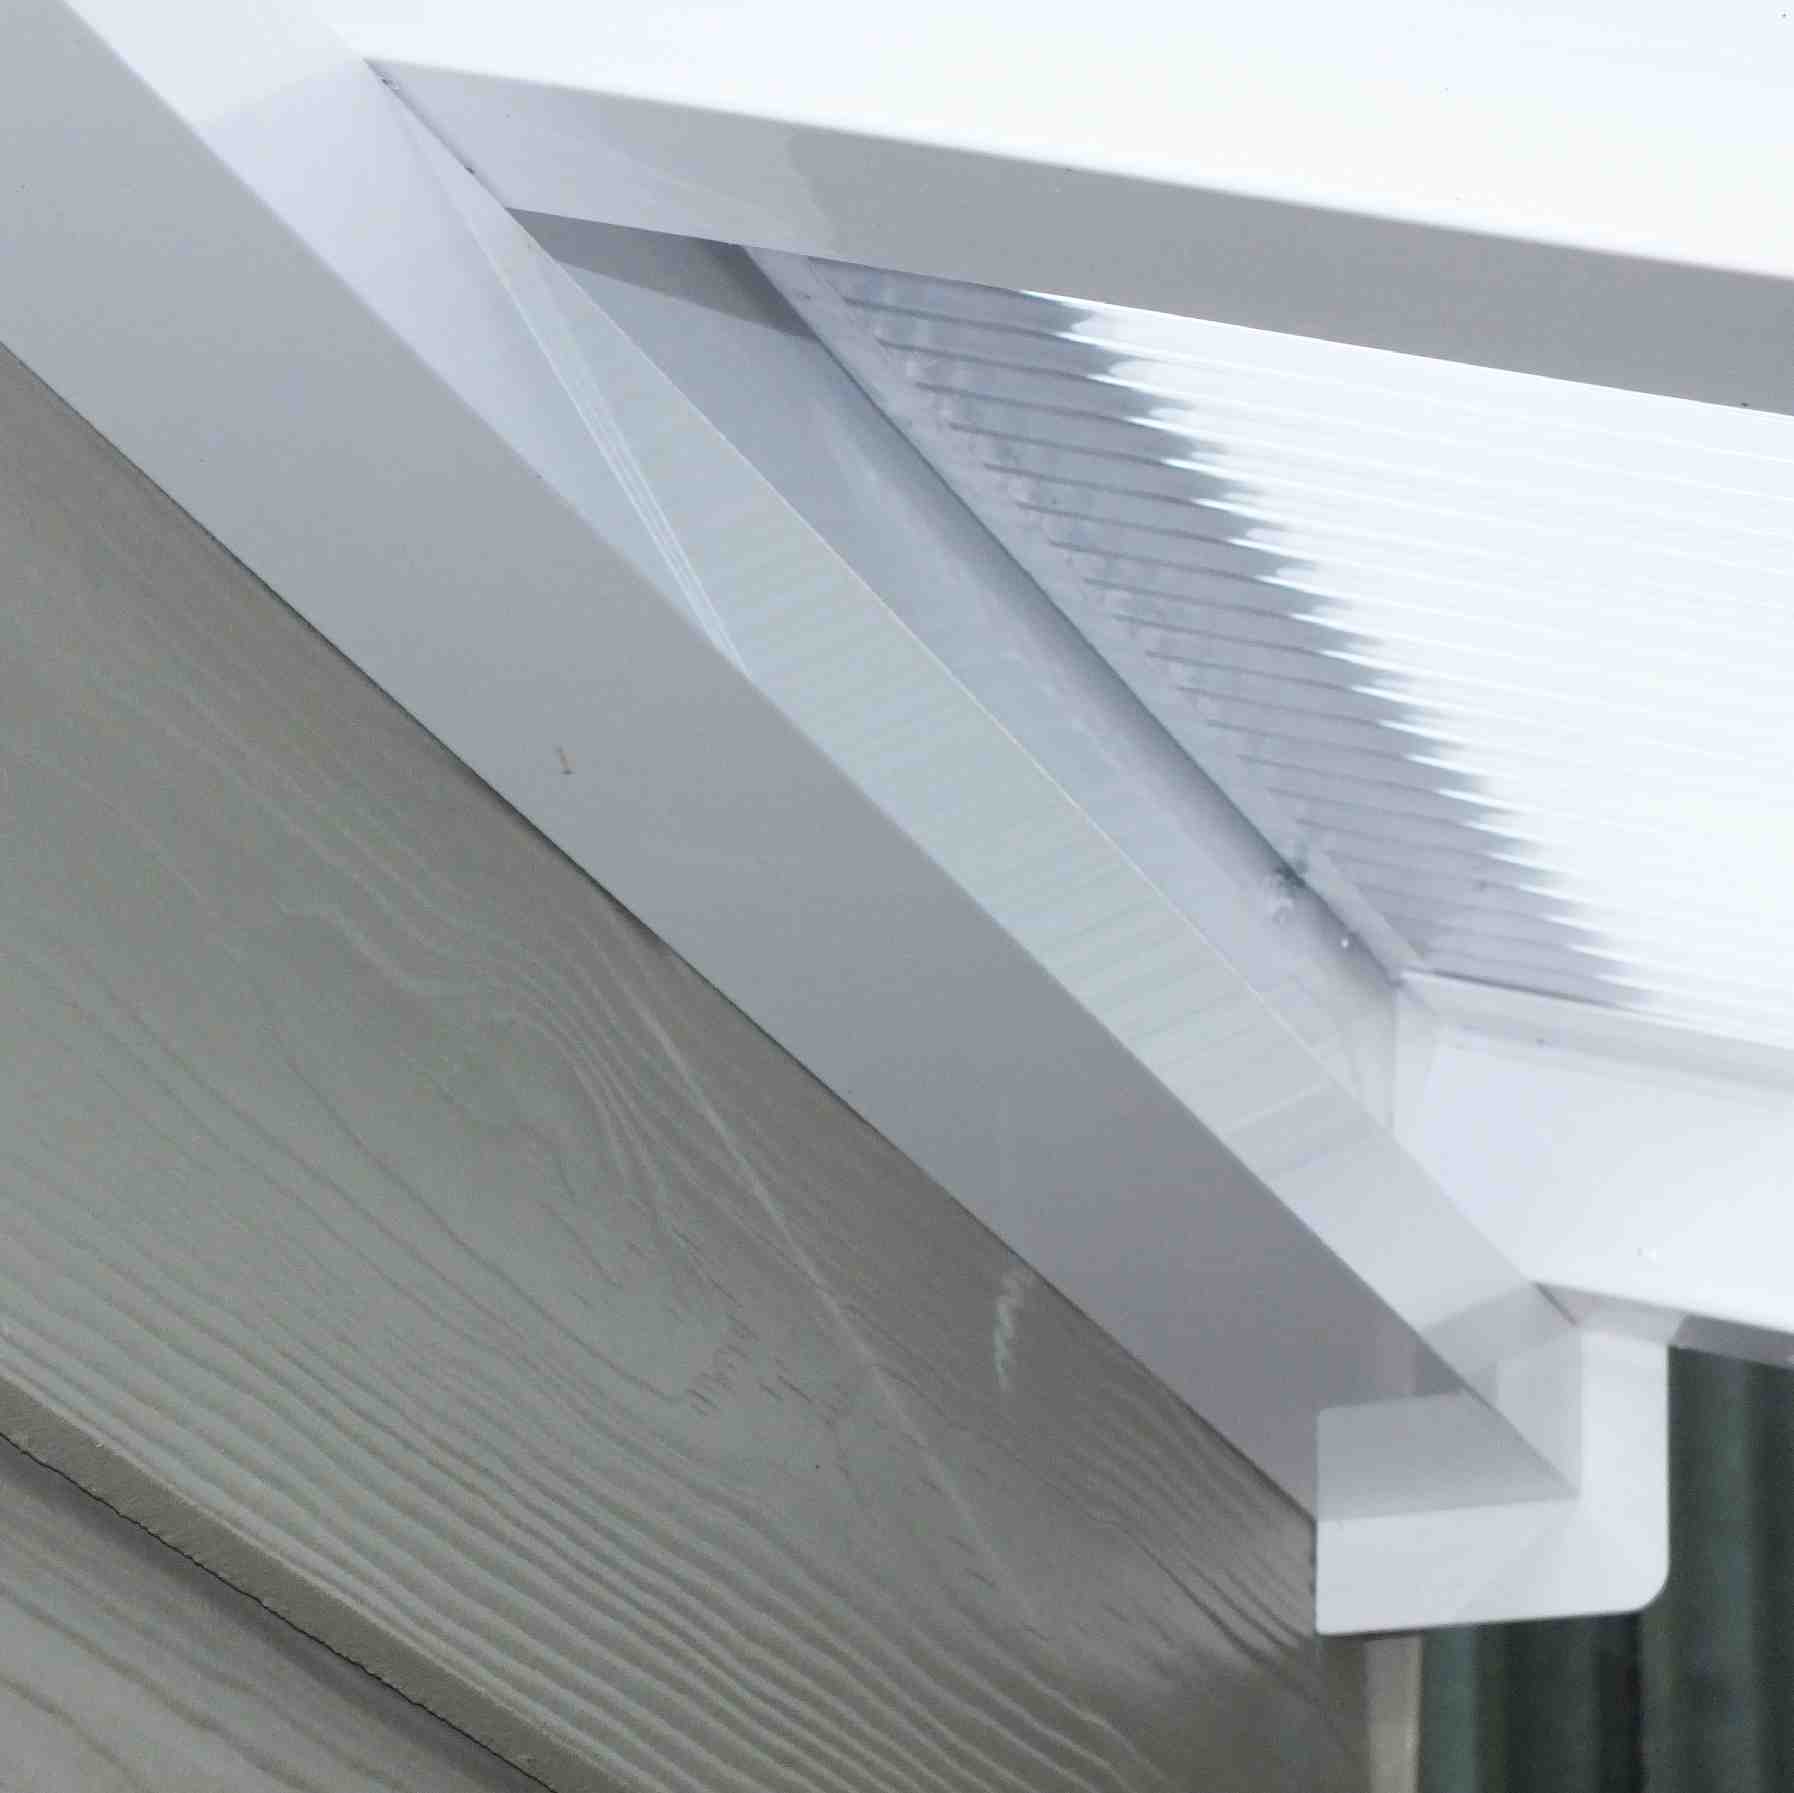 Great deals on Omega Verandah White with 16mm Polycarbonate Glazing - 9.9m (W) x 4.0m (P), (5) Supporting Posts